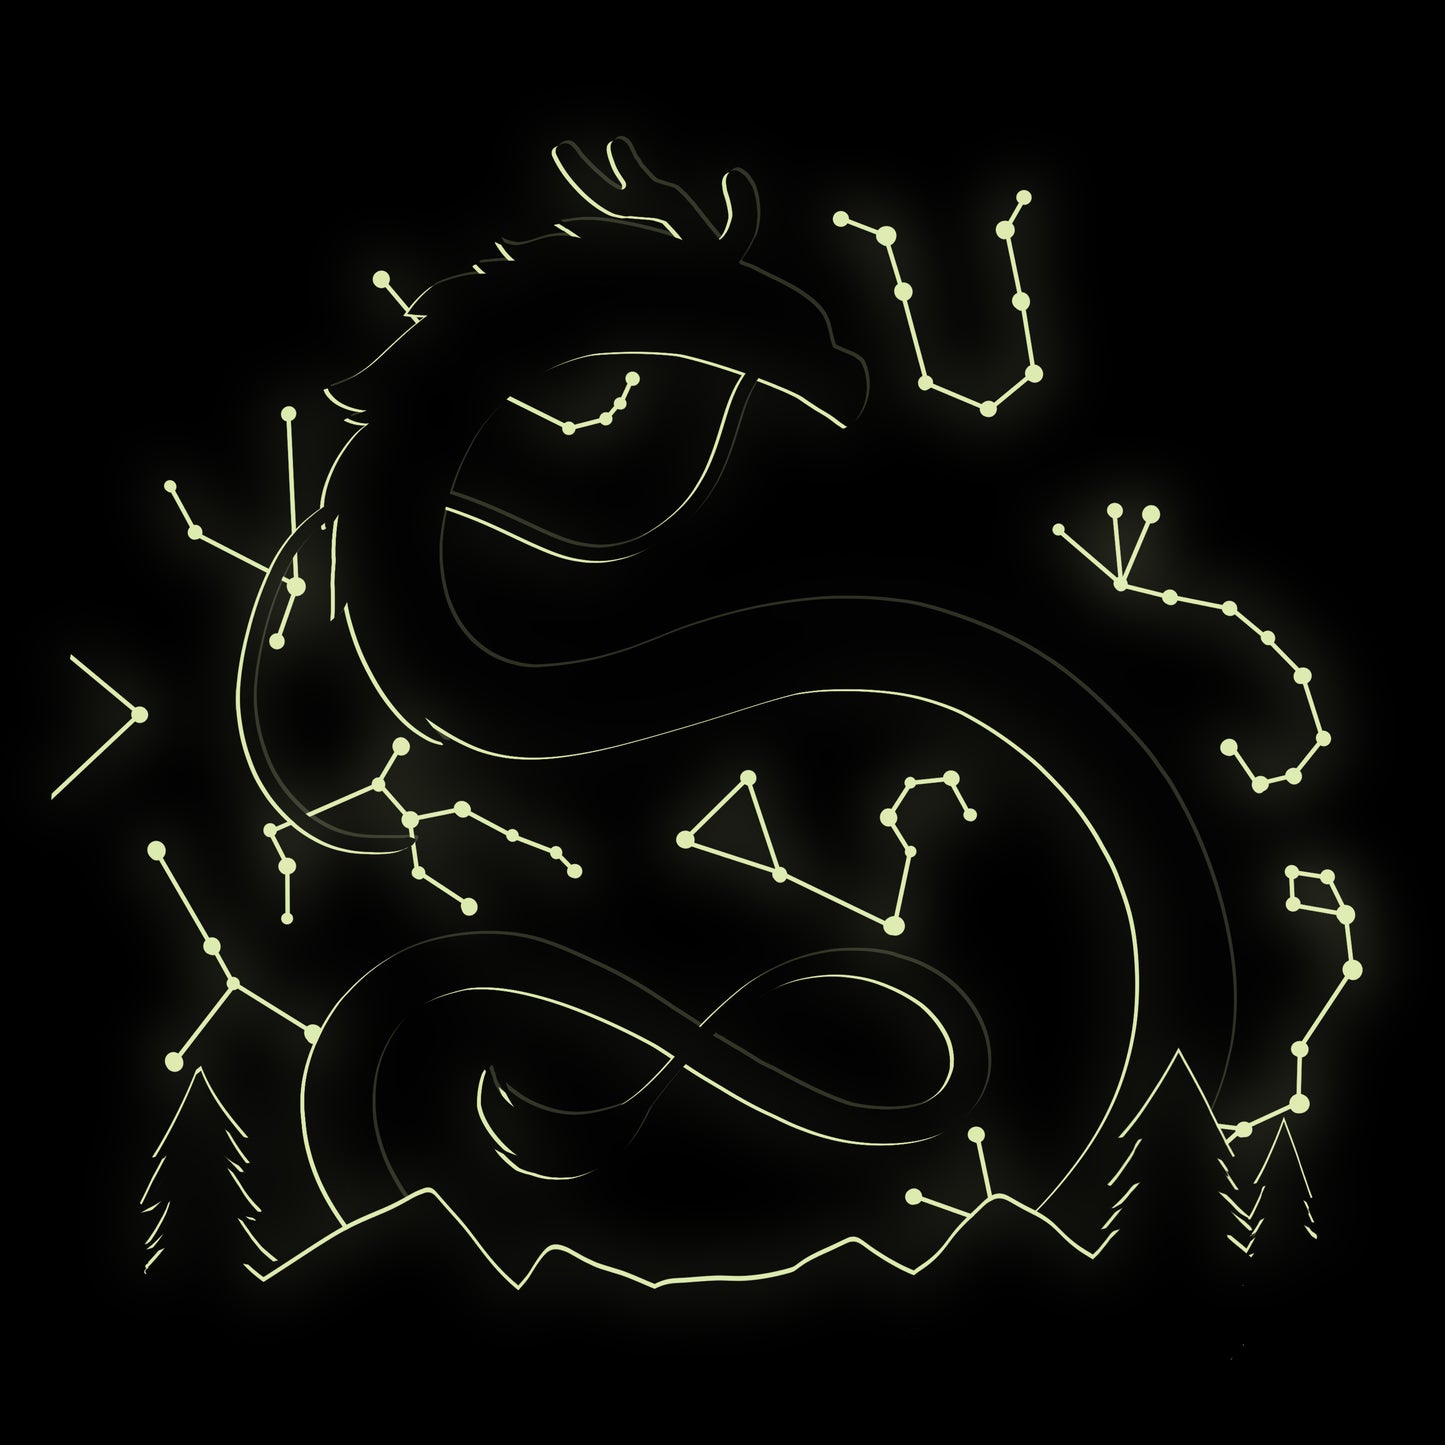 A TeeTurtle Celestial Dragon (Glow) is drawn on a black background with constellations.